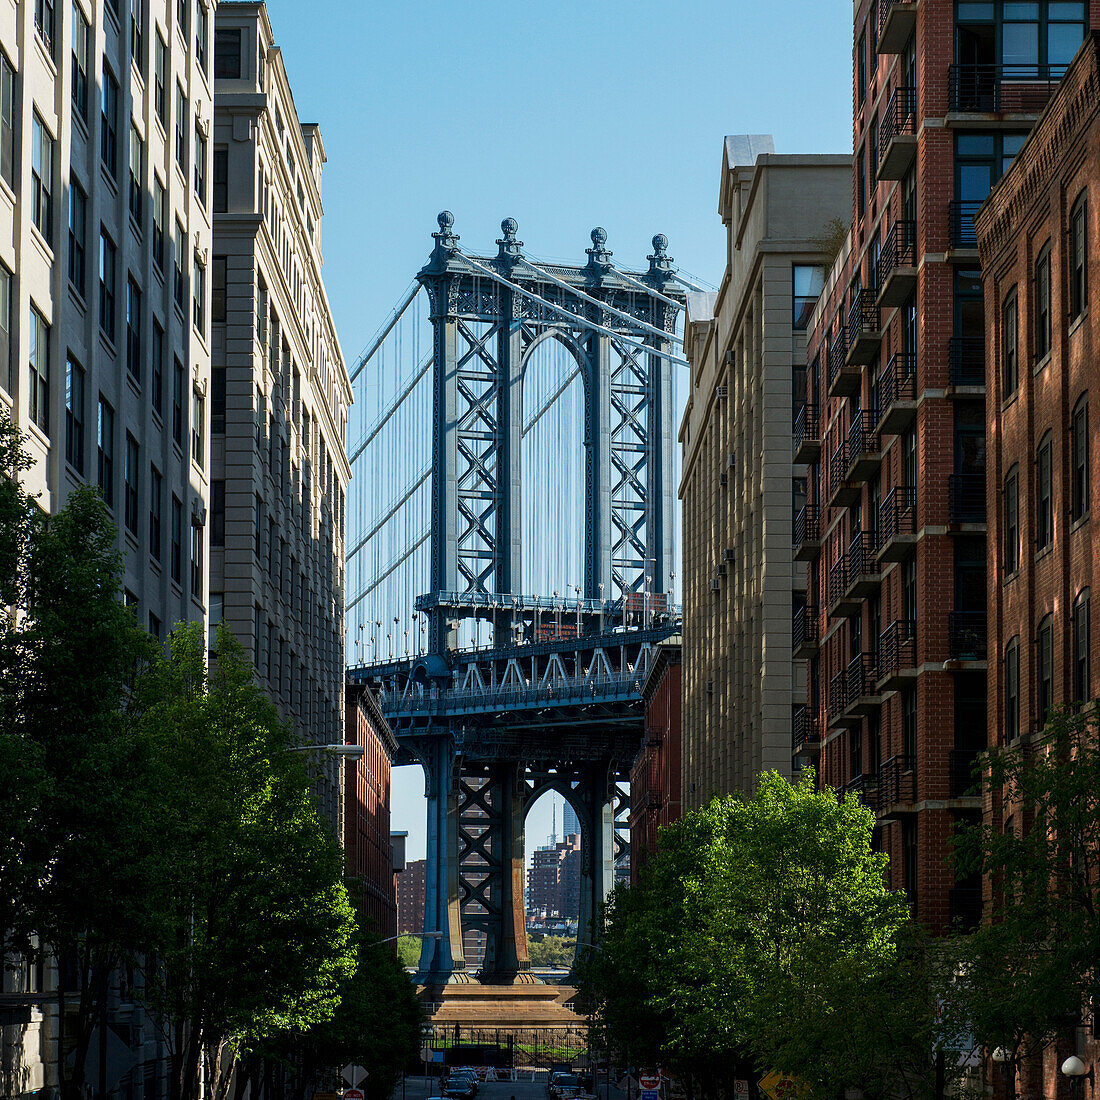 'Williamsburg bridge and buildings against a blue sky; New York City, New York, United States of America'